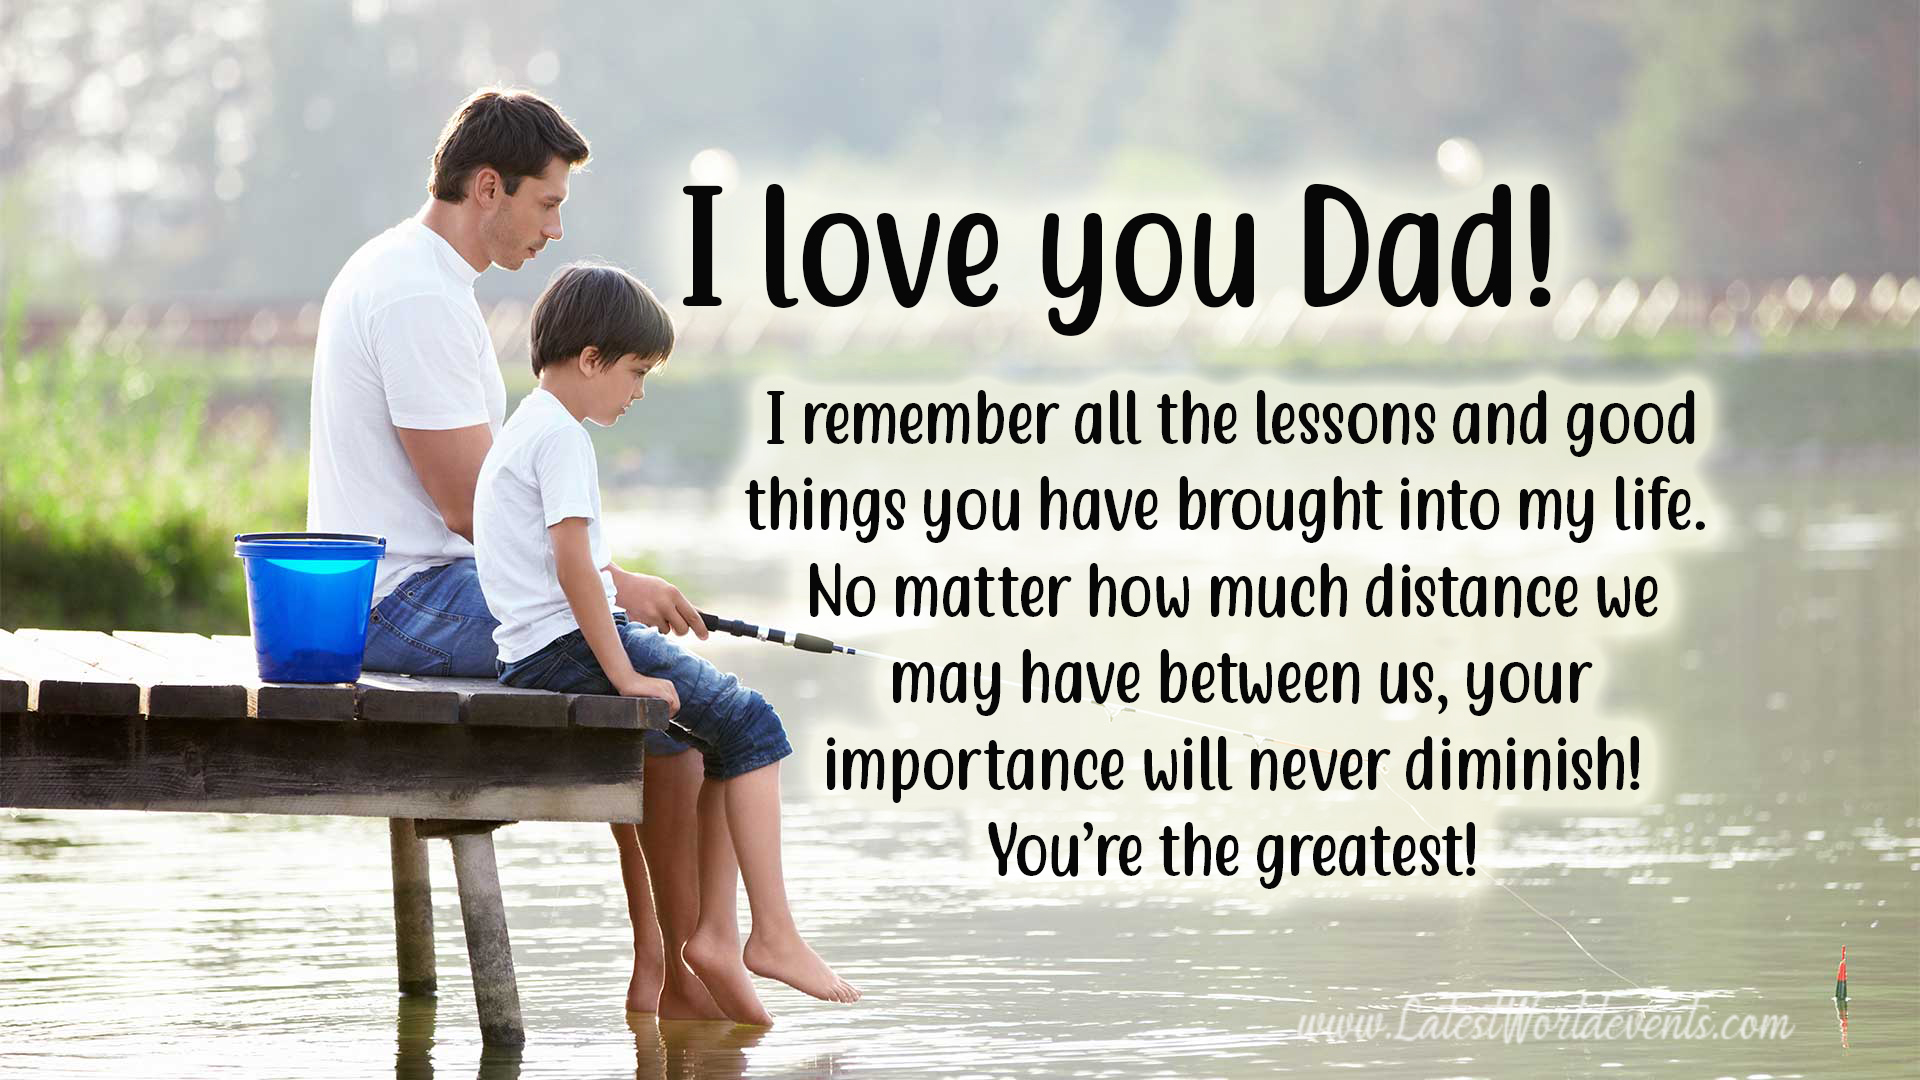 I Love You Dad Quotes From Daughter - 9to5 Car Wallpapers Latest Downloads